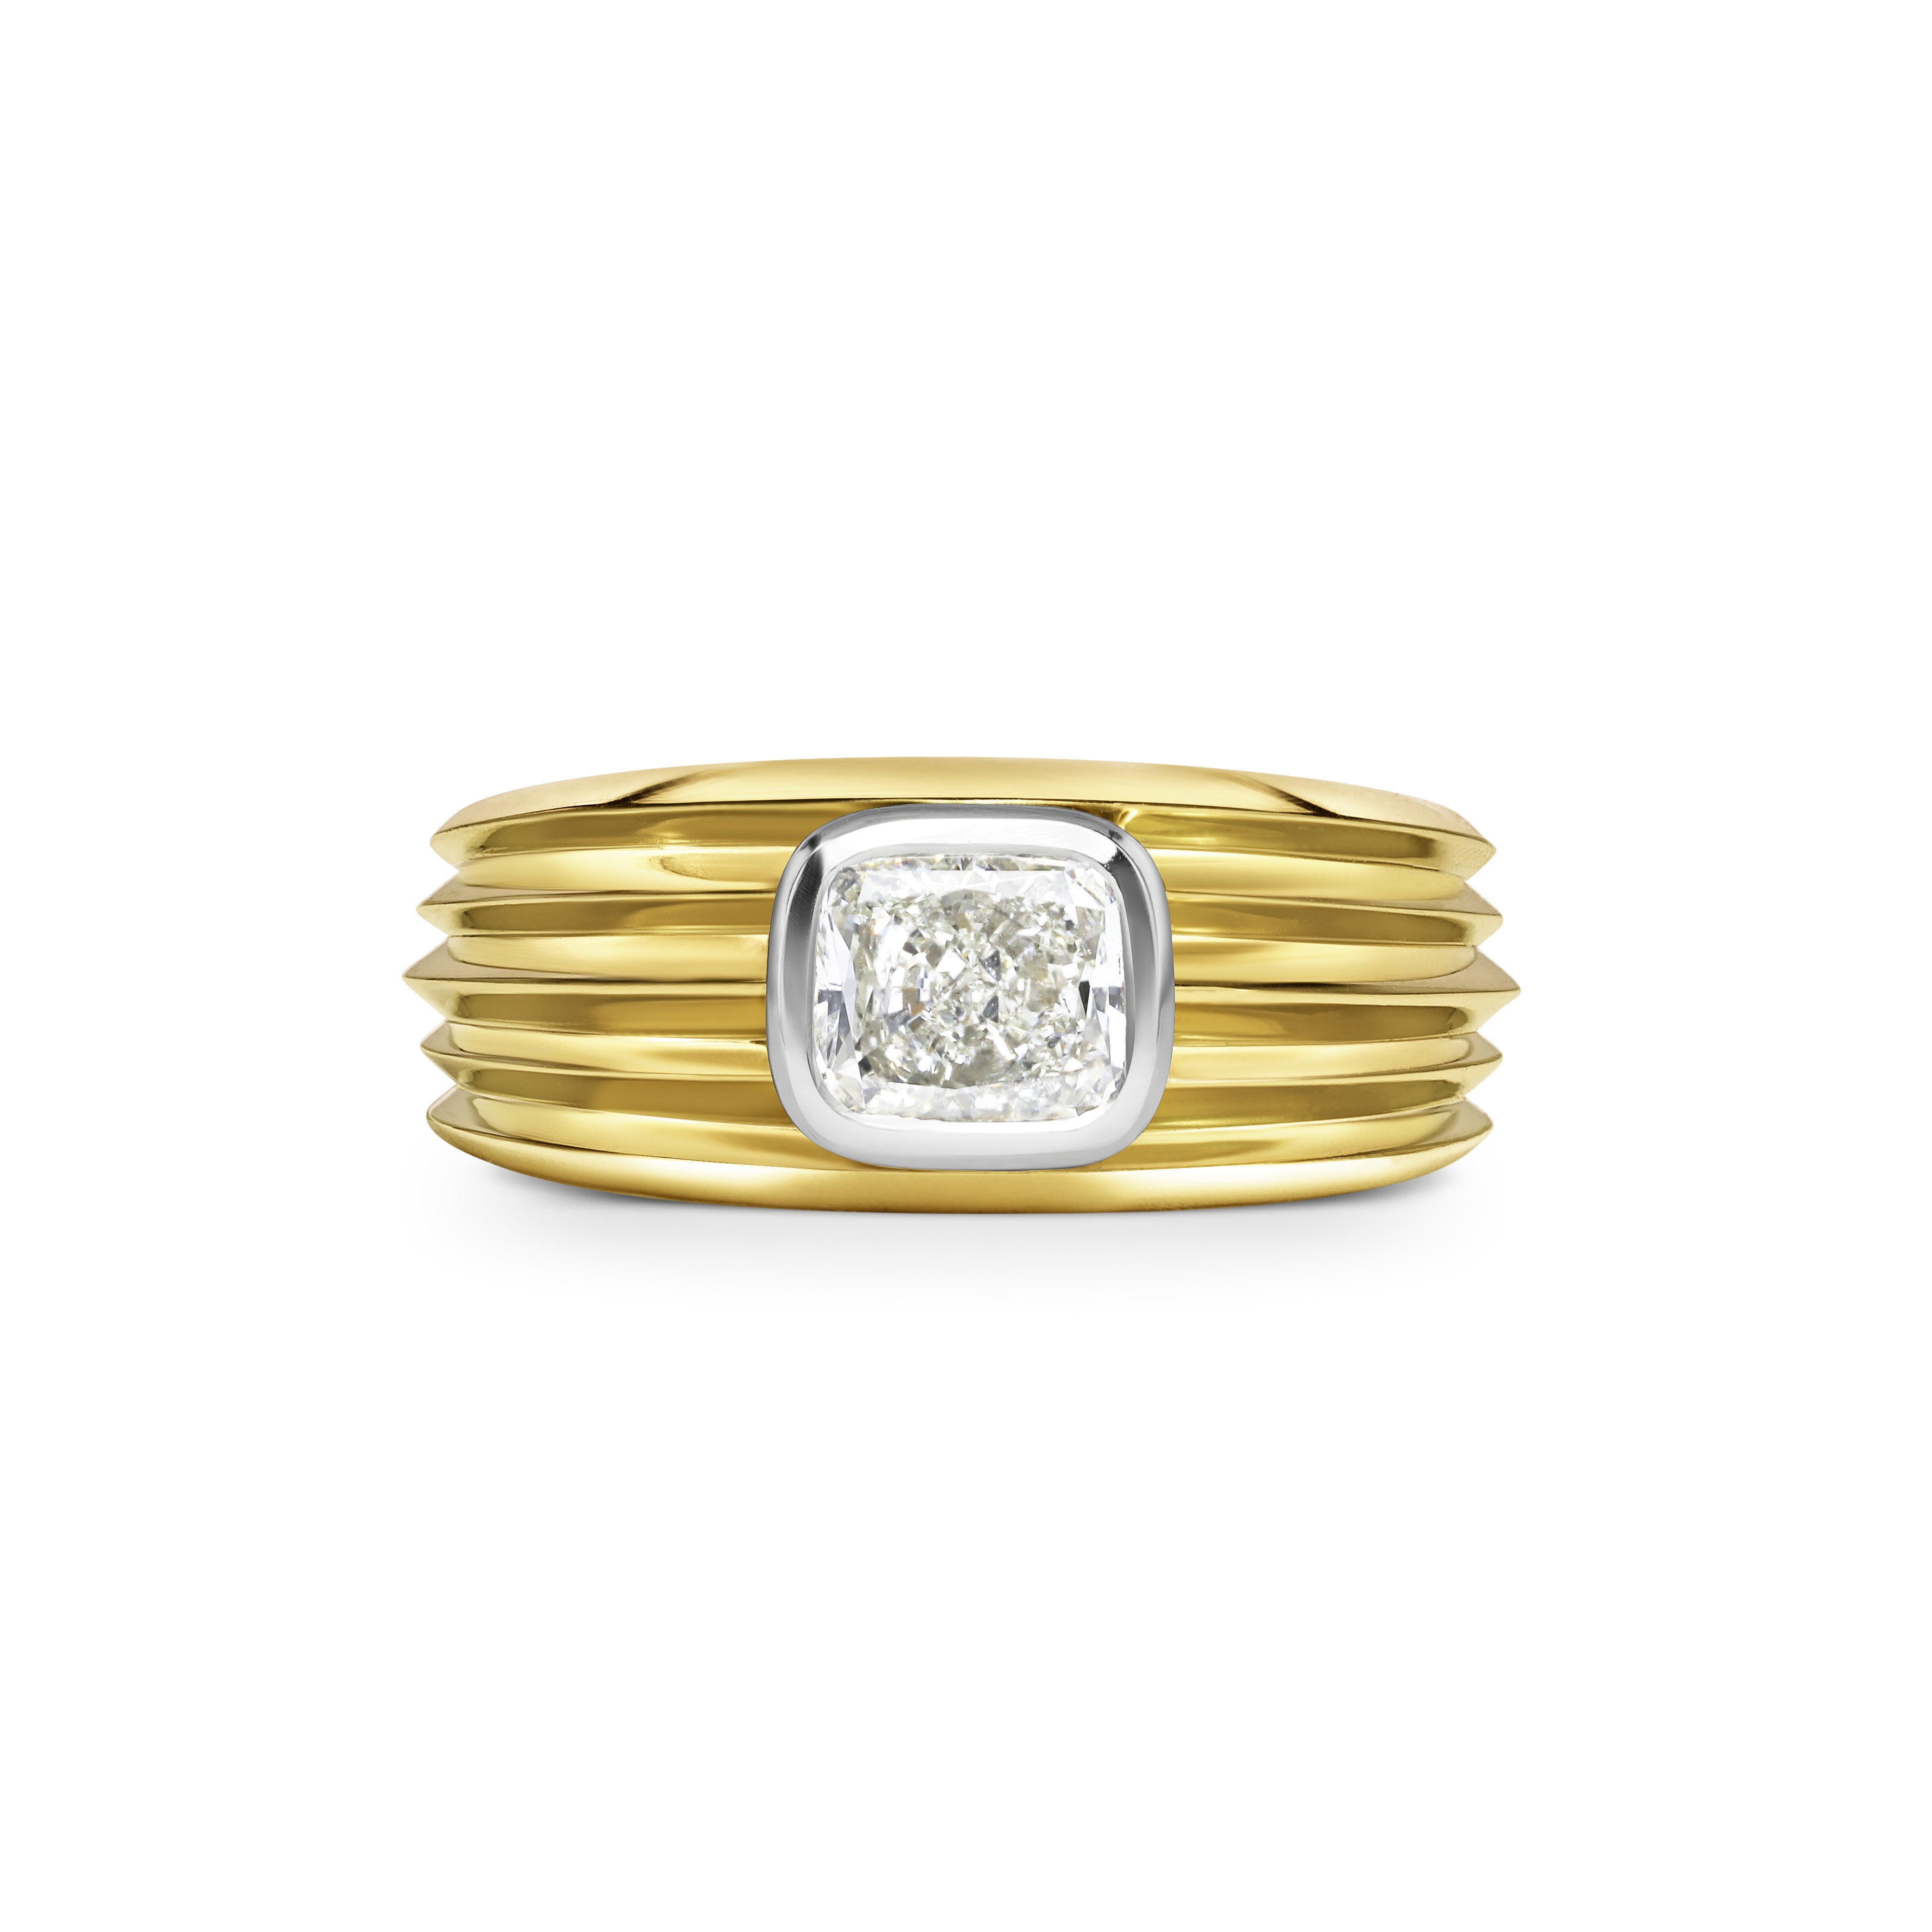 The Astarte Ring by East London jeweller Rachel Boston | Discover our collections of unique and timeless engagement rings, wedding rings, and modern fine jewellery.